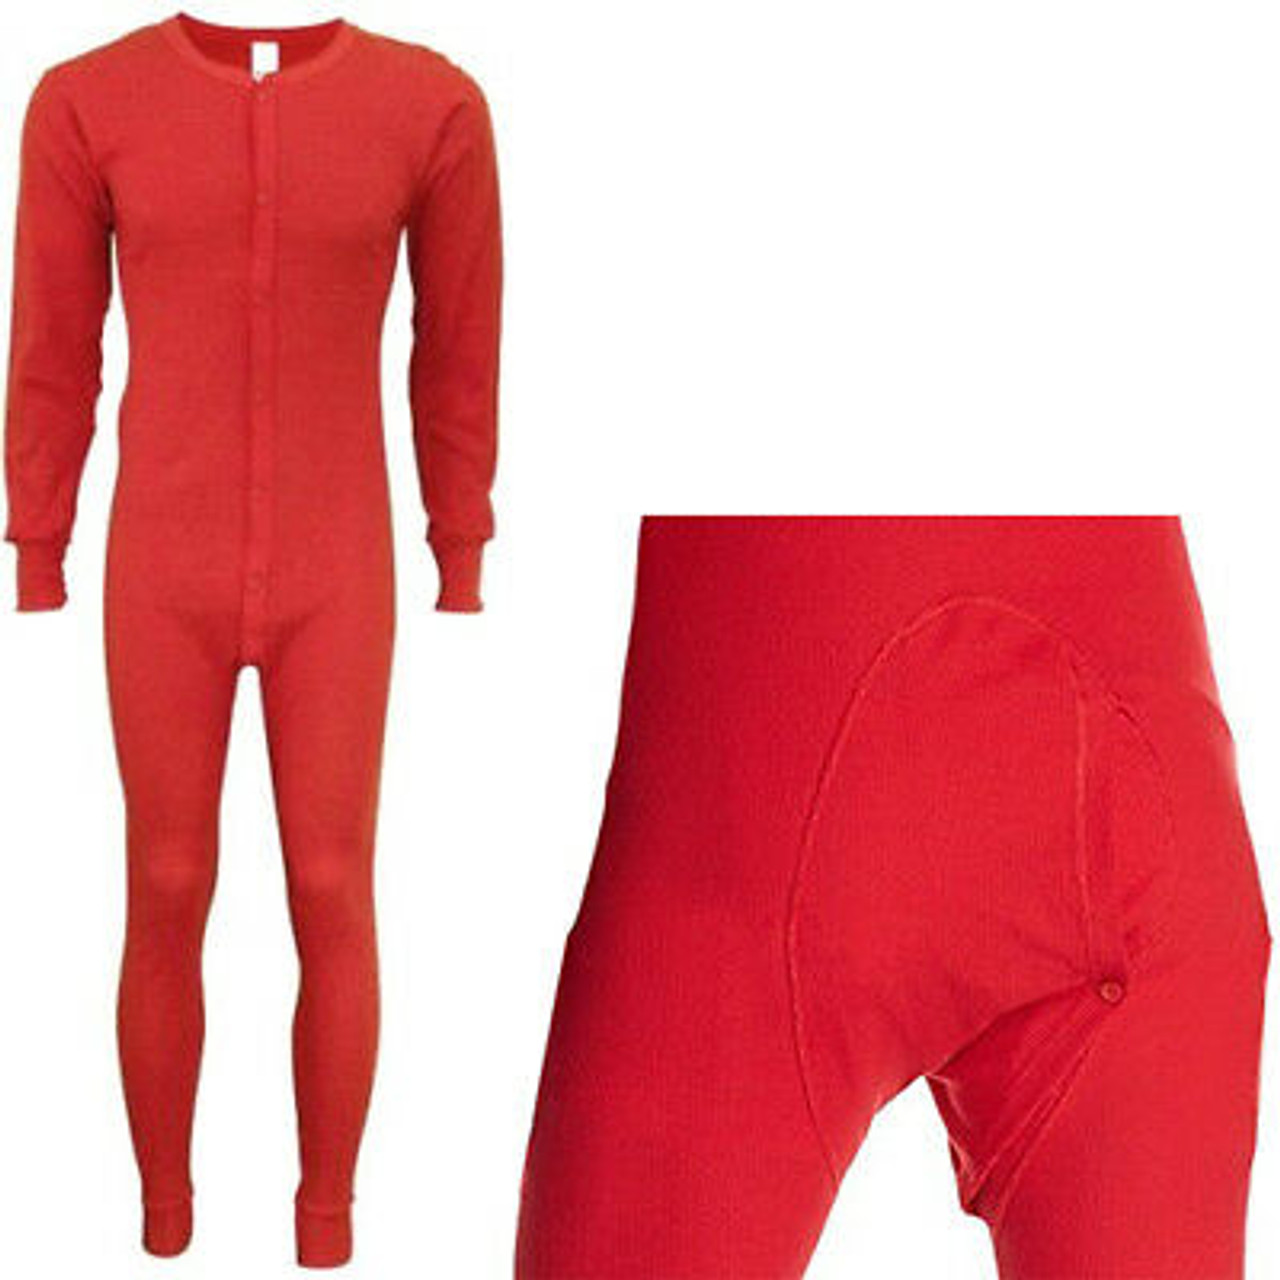 Red Union Suit Thermals One Piece Long Johns Full Body Warm Winter